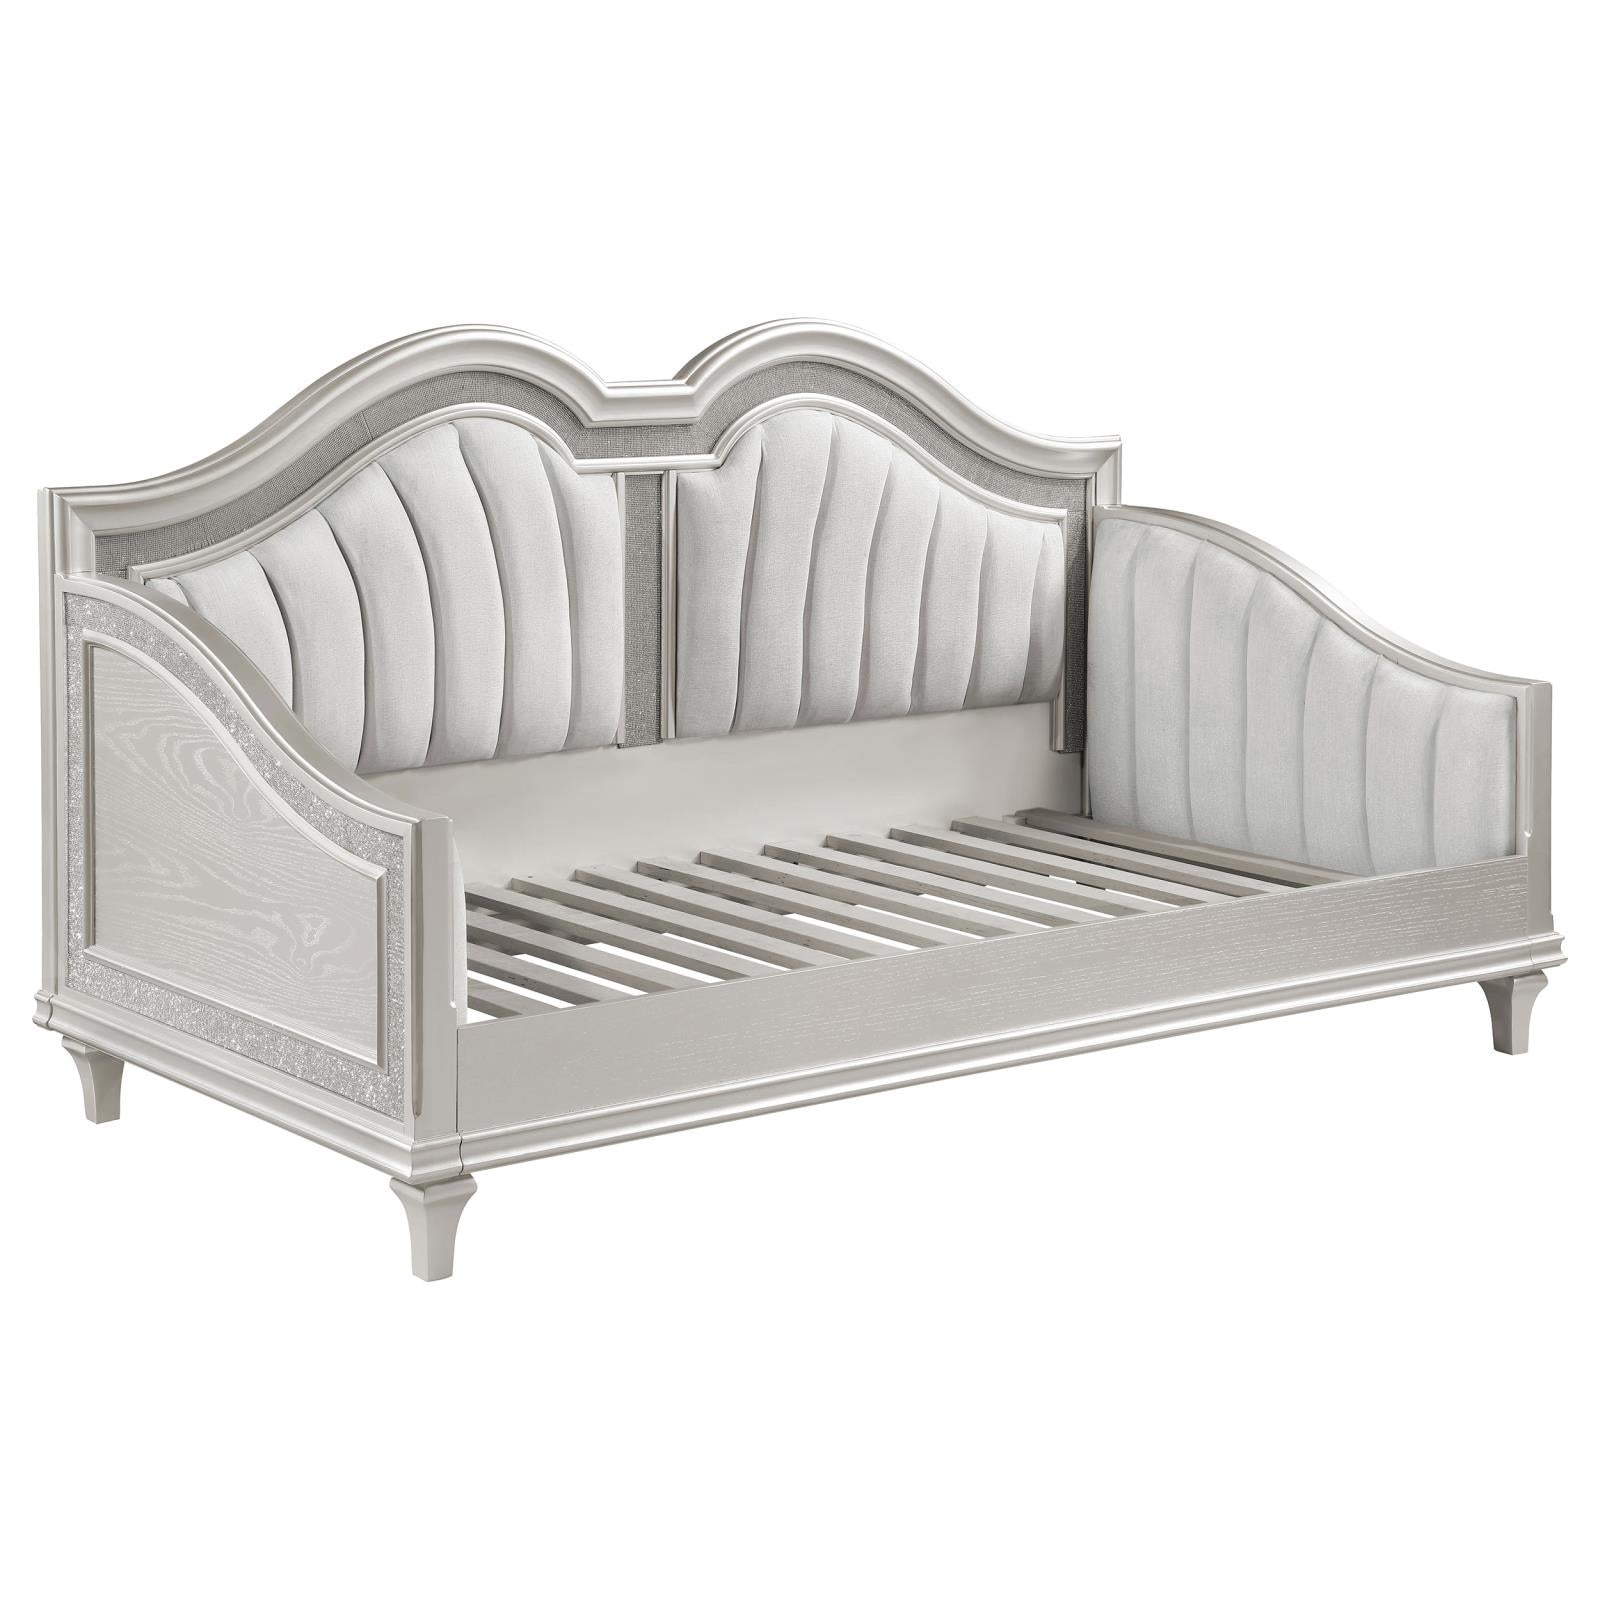 Evangeline Evangeline Upholstered Twin Daybed With Faux Diamond Trim Silver And Ivory 360121